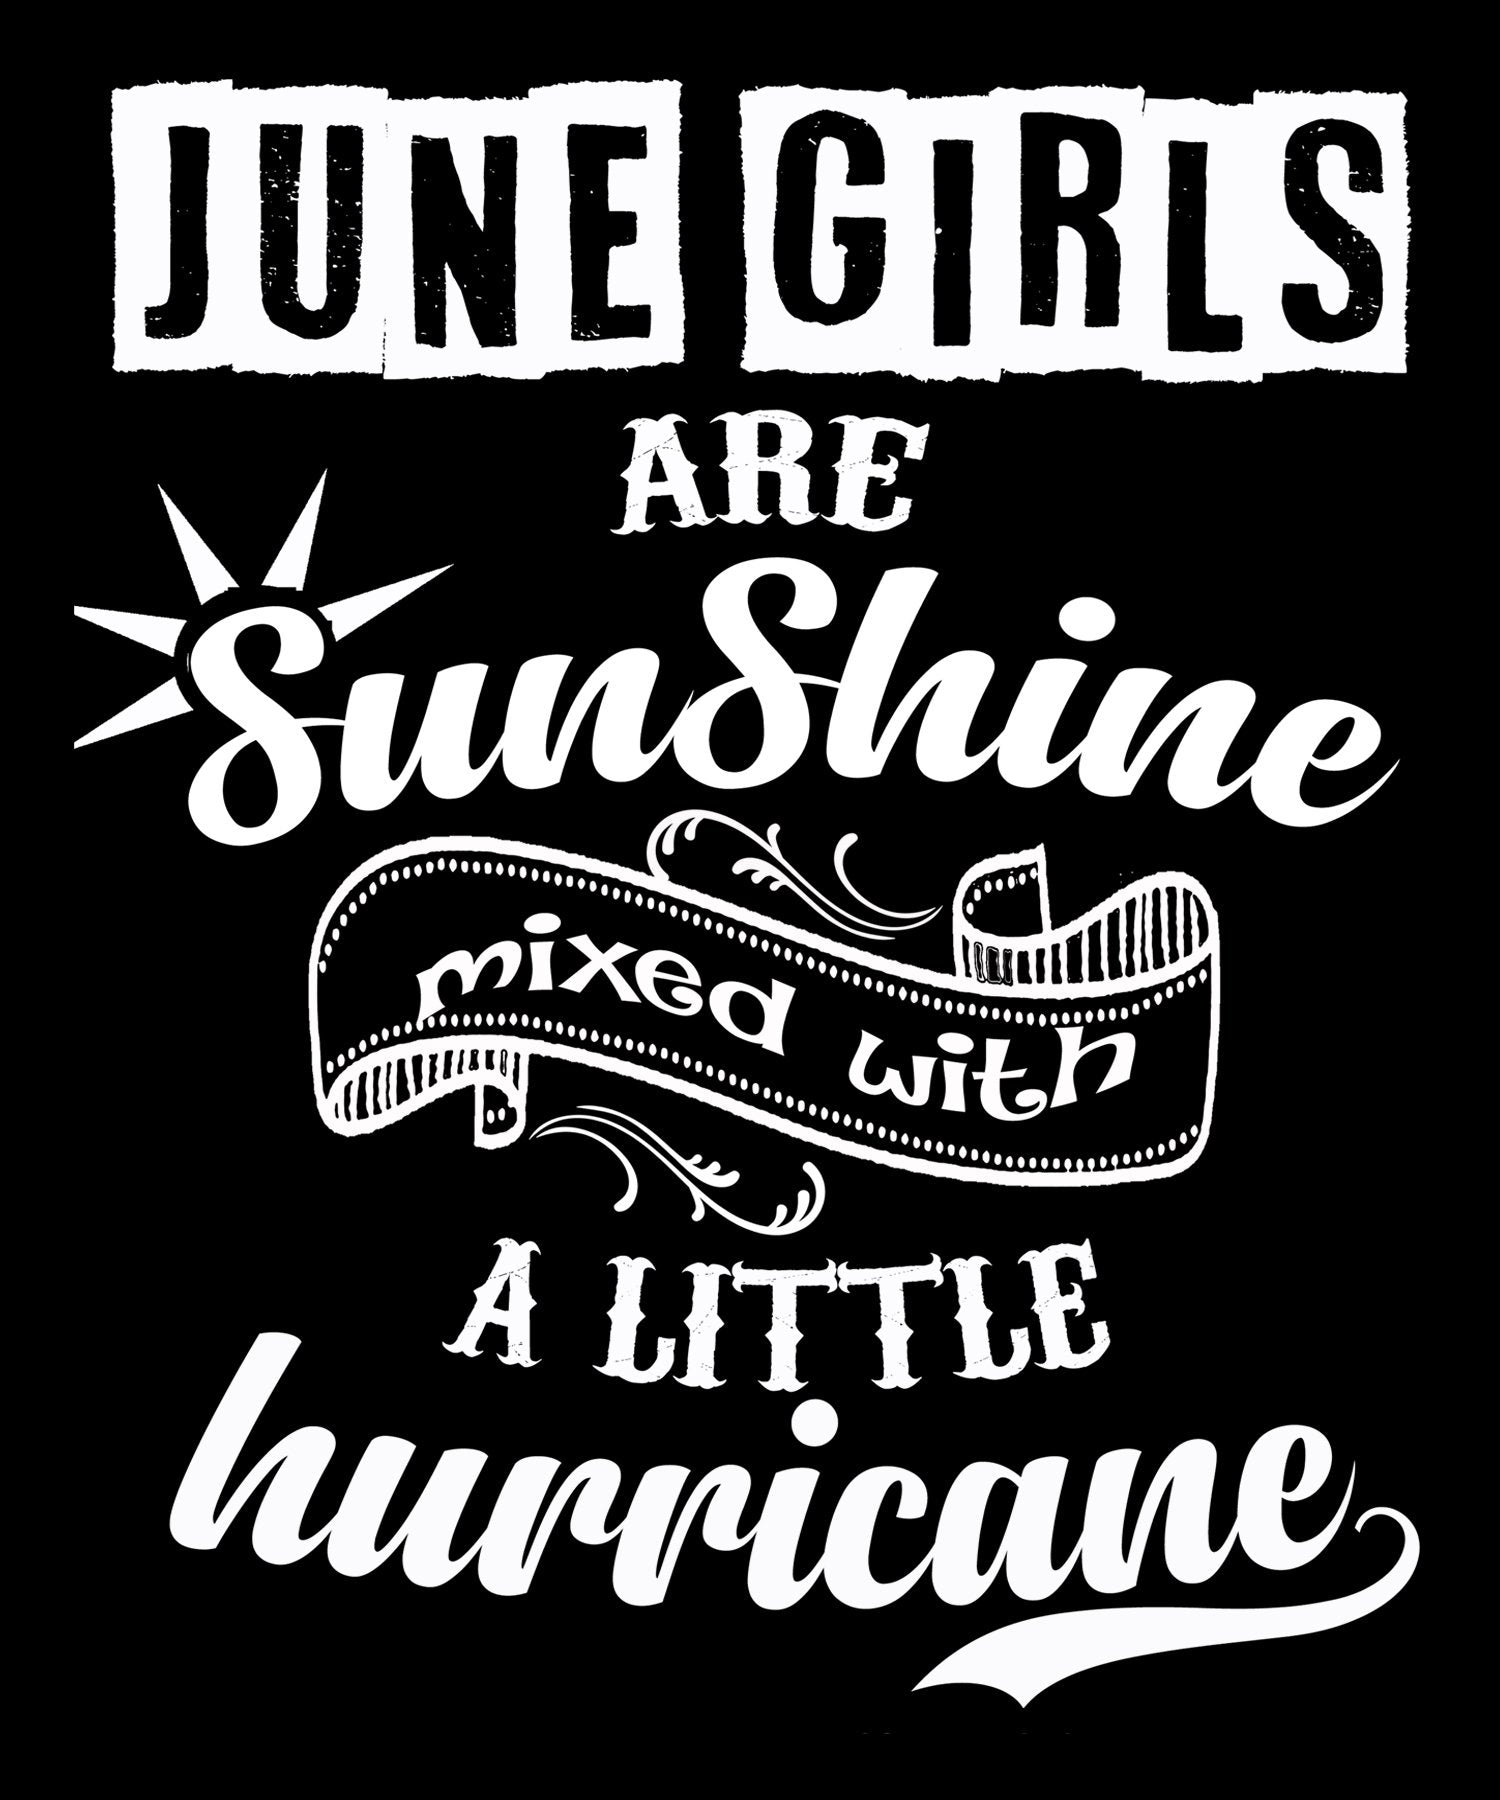 June Girls Are Sunshine Mixed With Hurricane & pre-approved